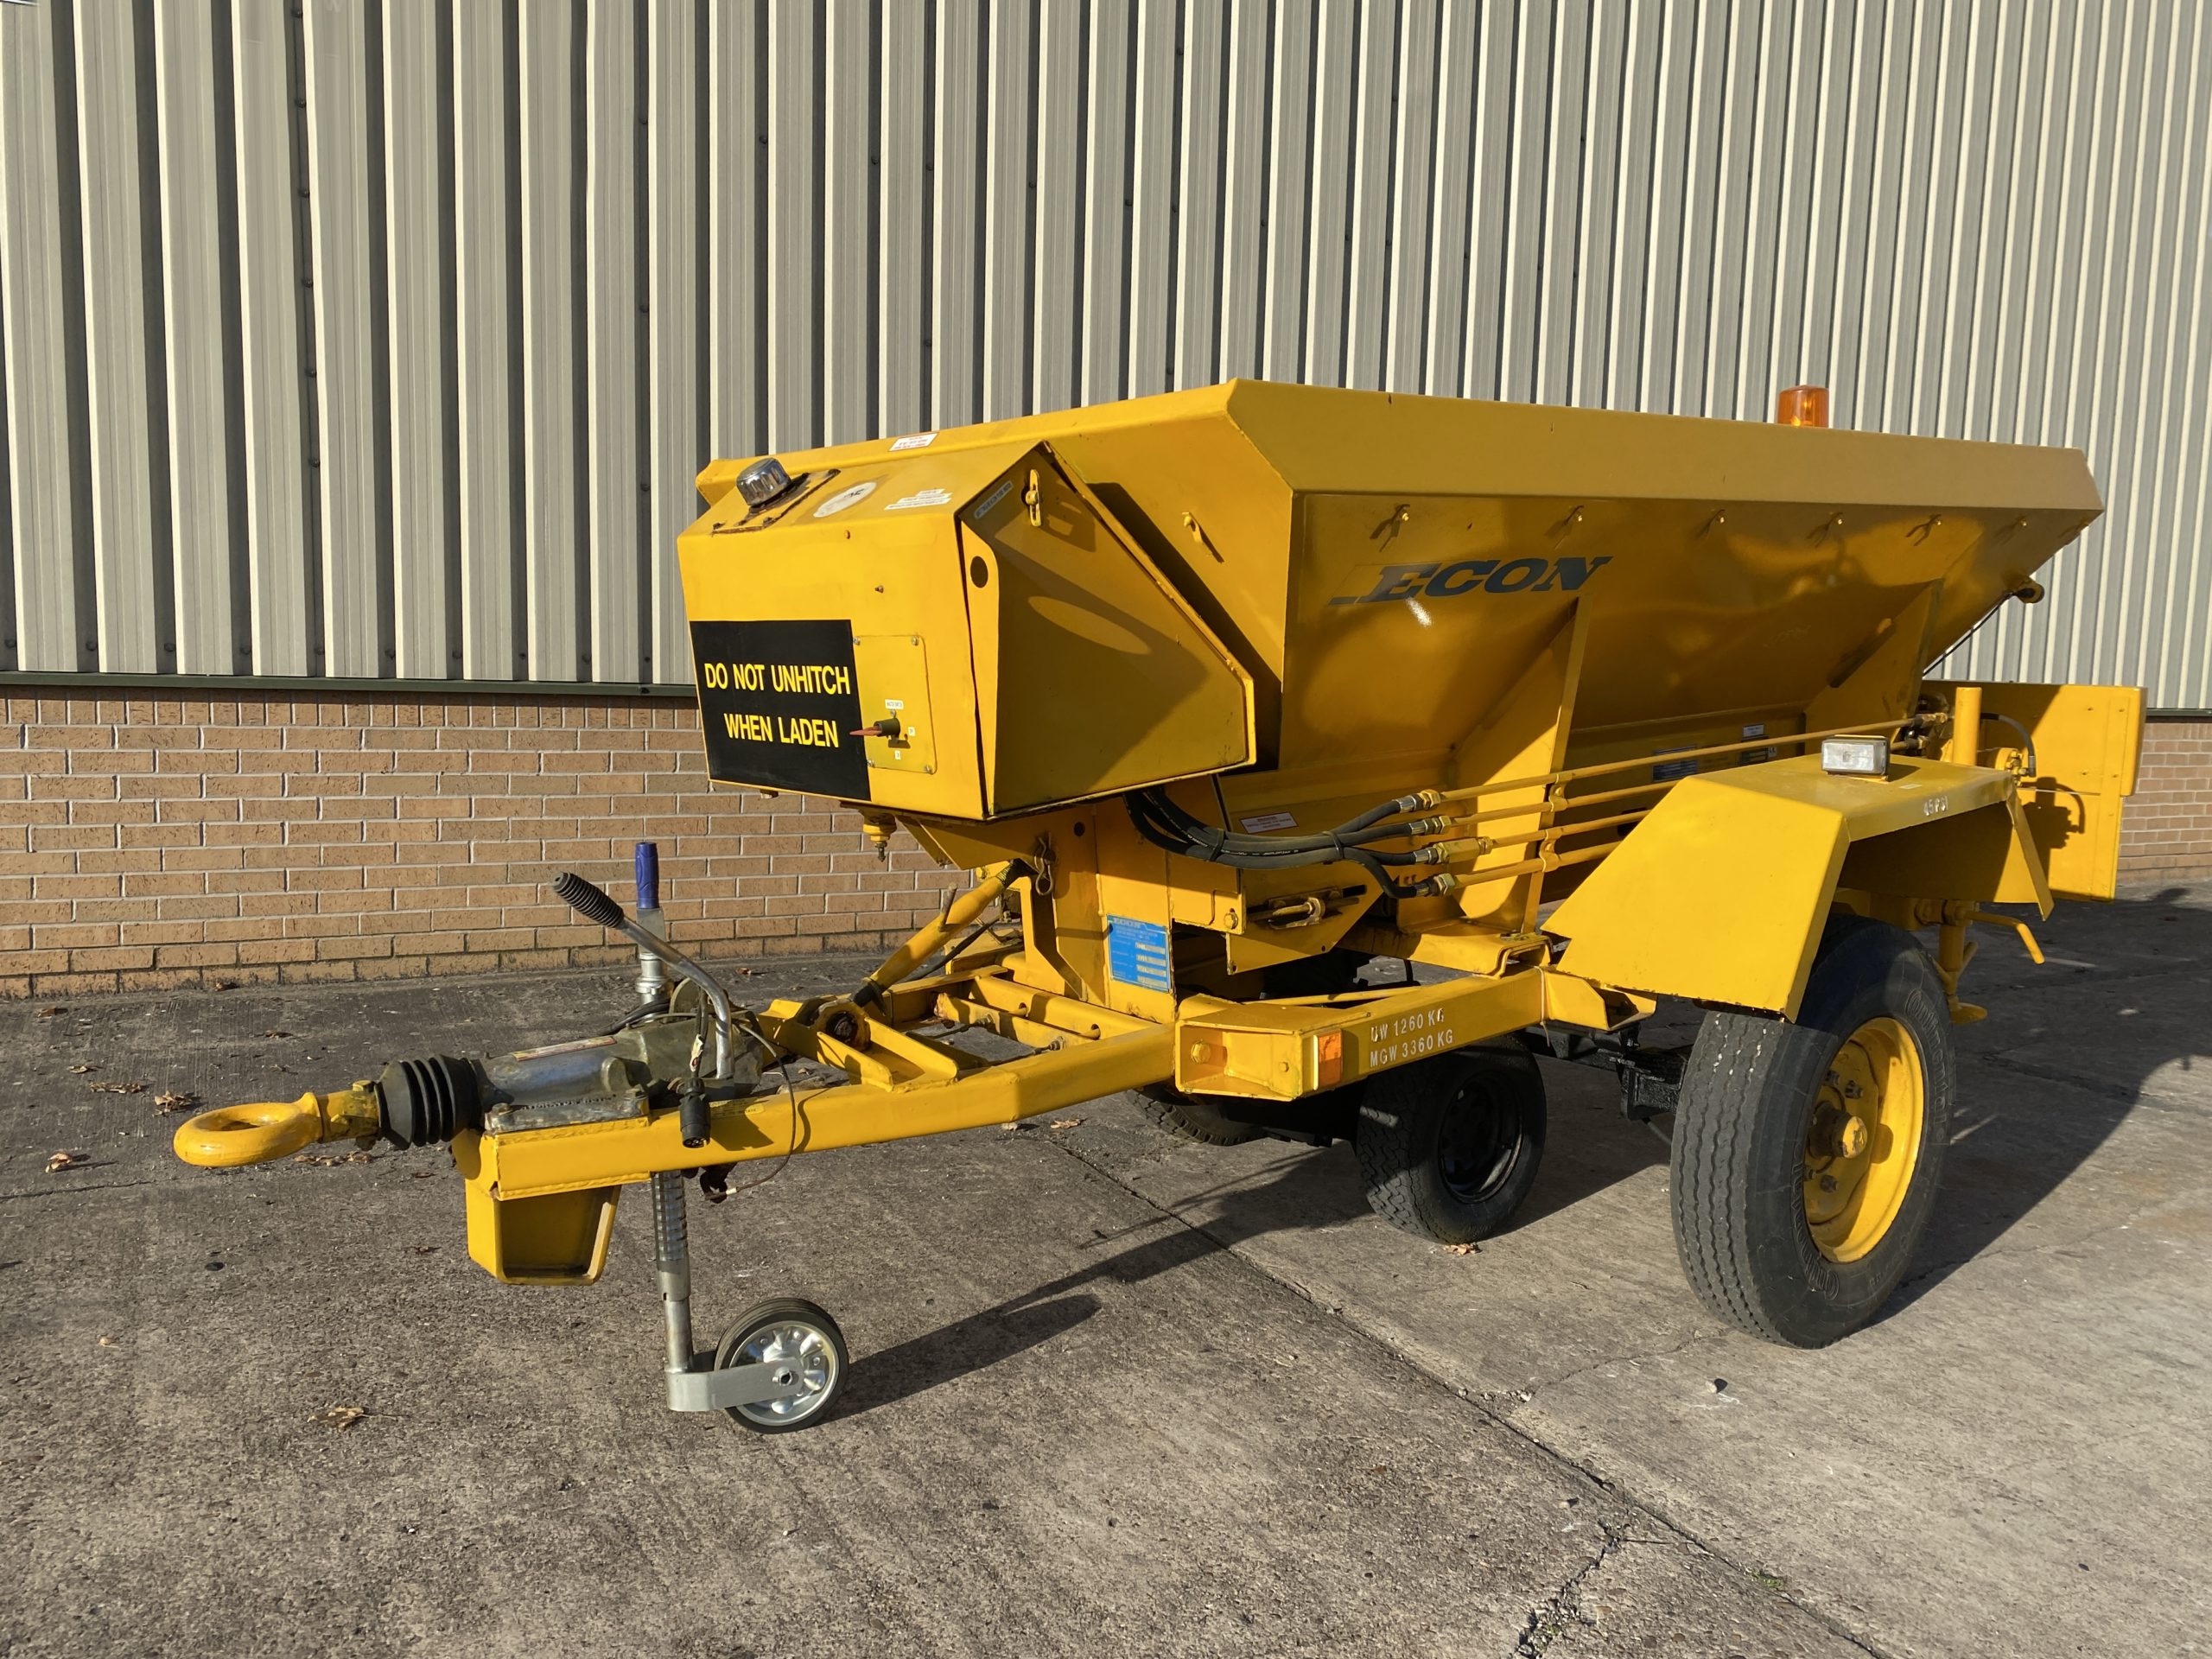 Econ towed gritter trailer - Govsales of mod surplus ex army trucks, ex army land rovers and other military vehicles for sale